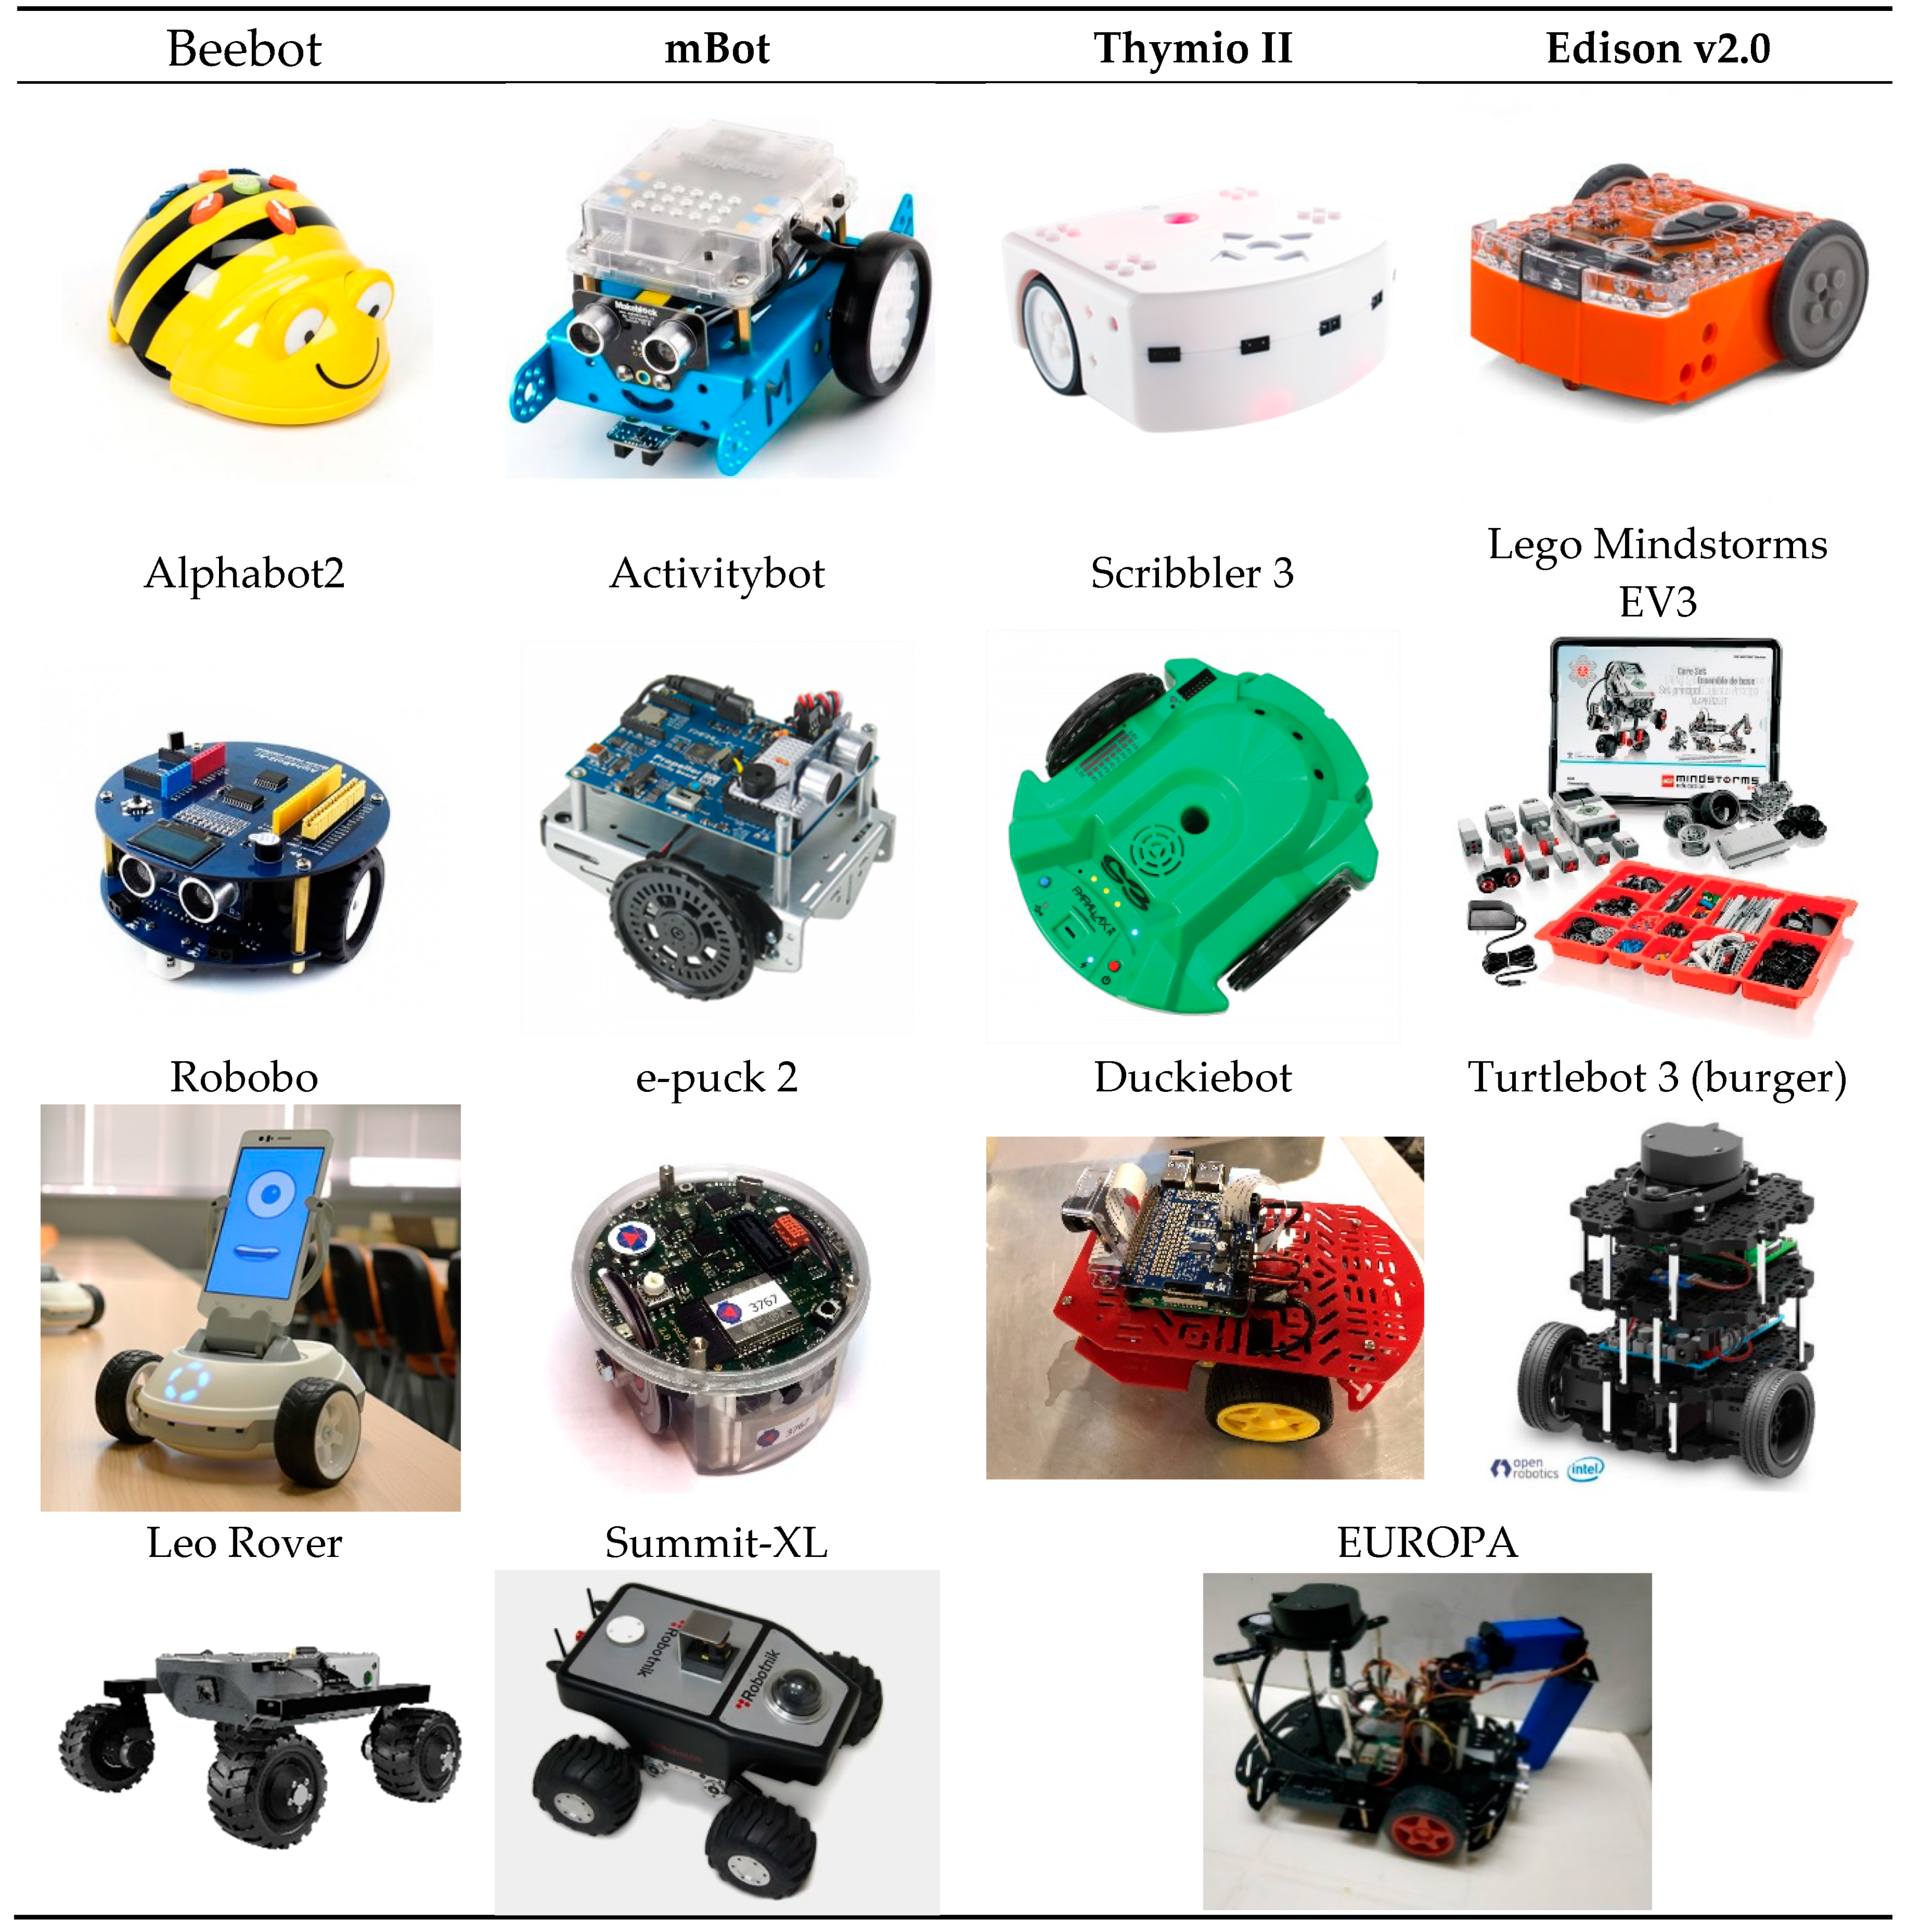 Sensors Free Full Text Europa A Case Study For Teaching Sensors Data Acquisition And Robotics Via A Ros Based Educational Robot Html